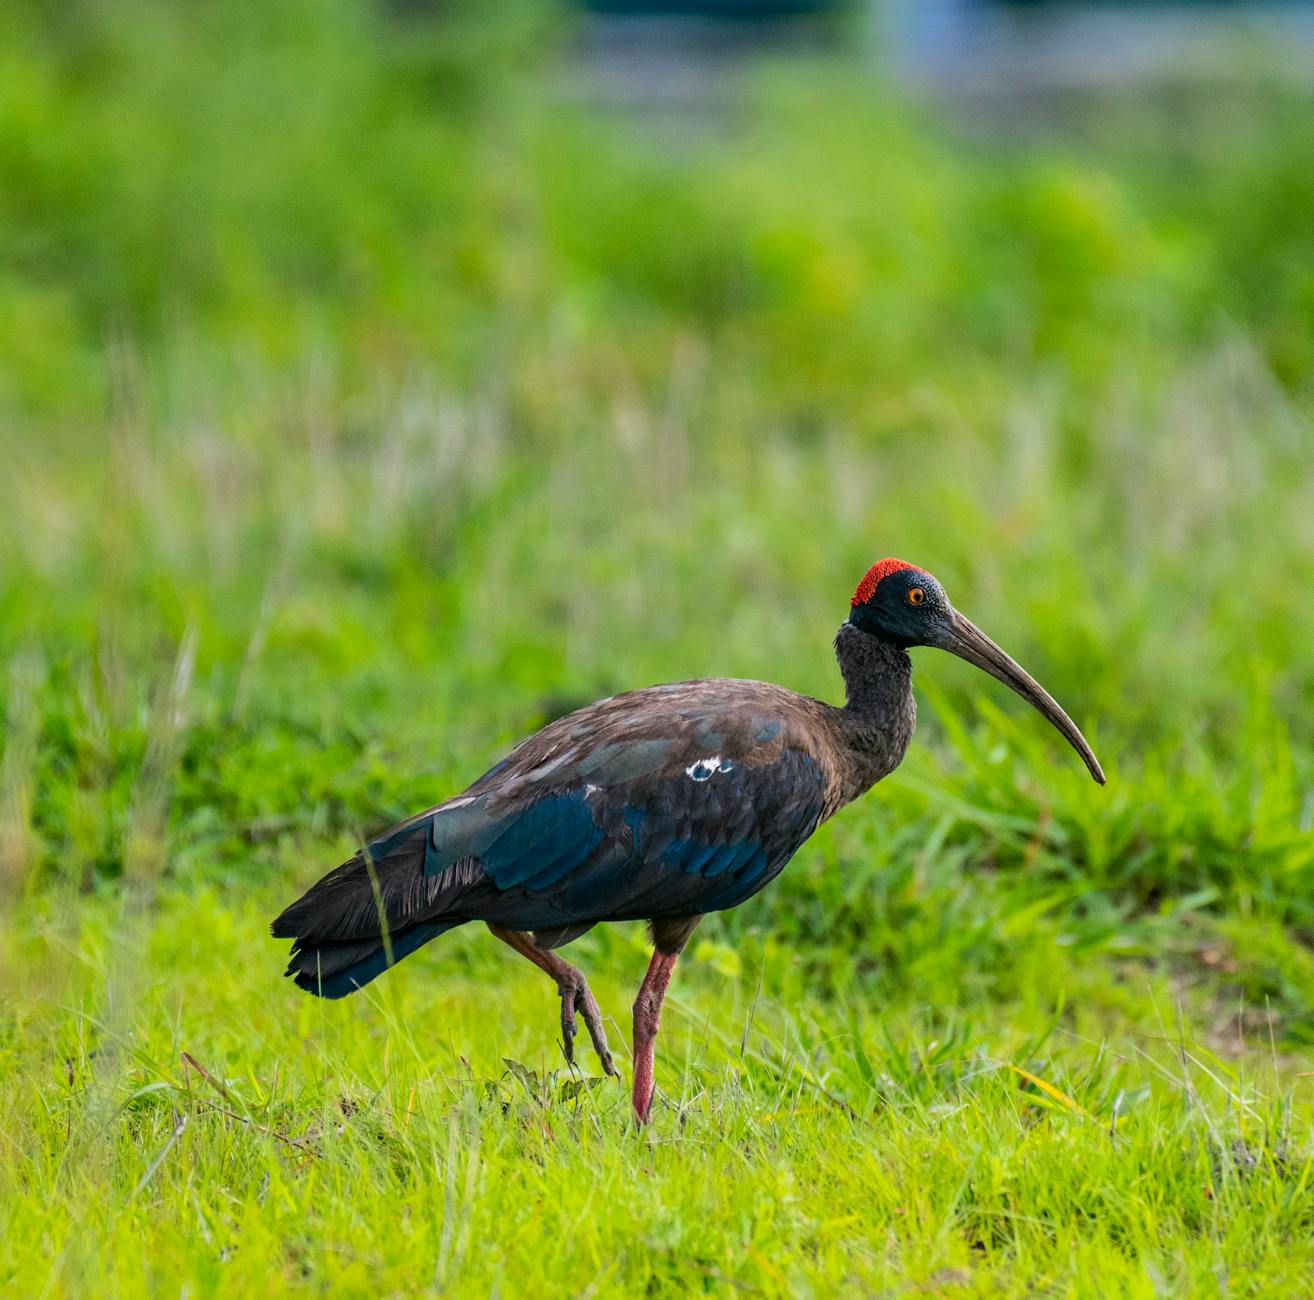 red-naped-ibis-standing-on-a-grass-field-free-stock-photo